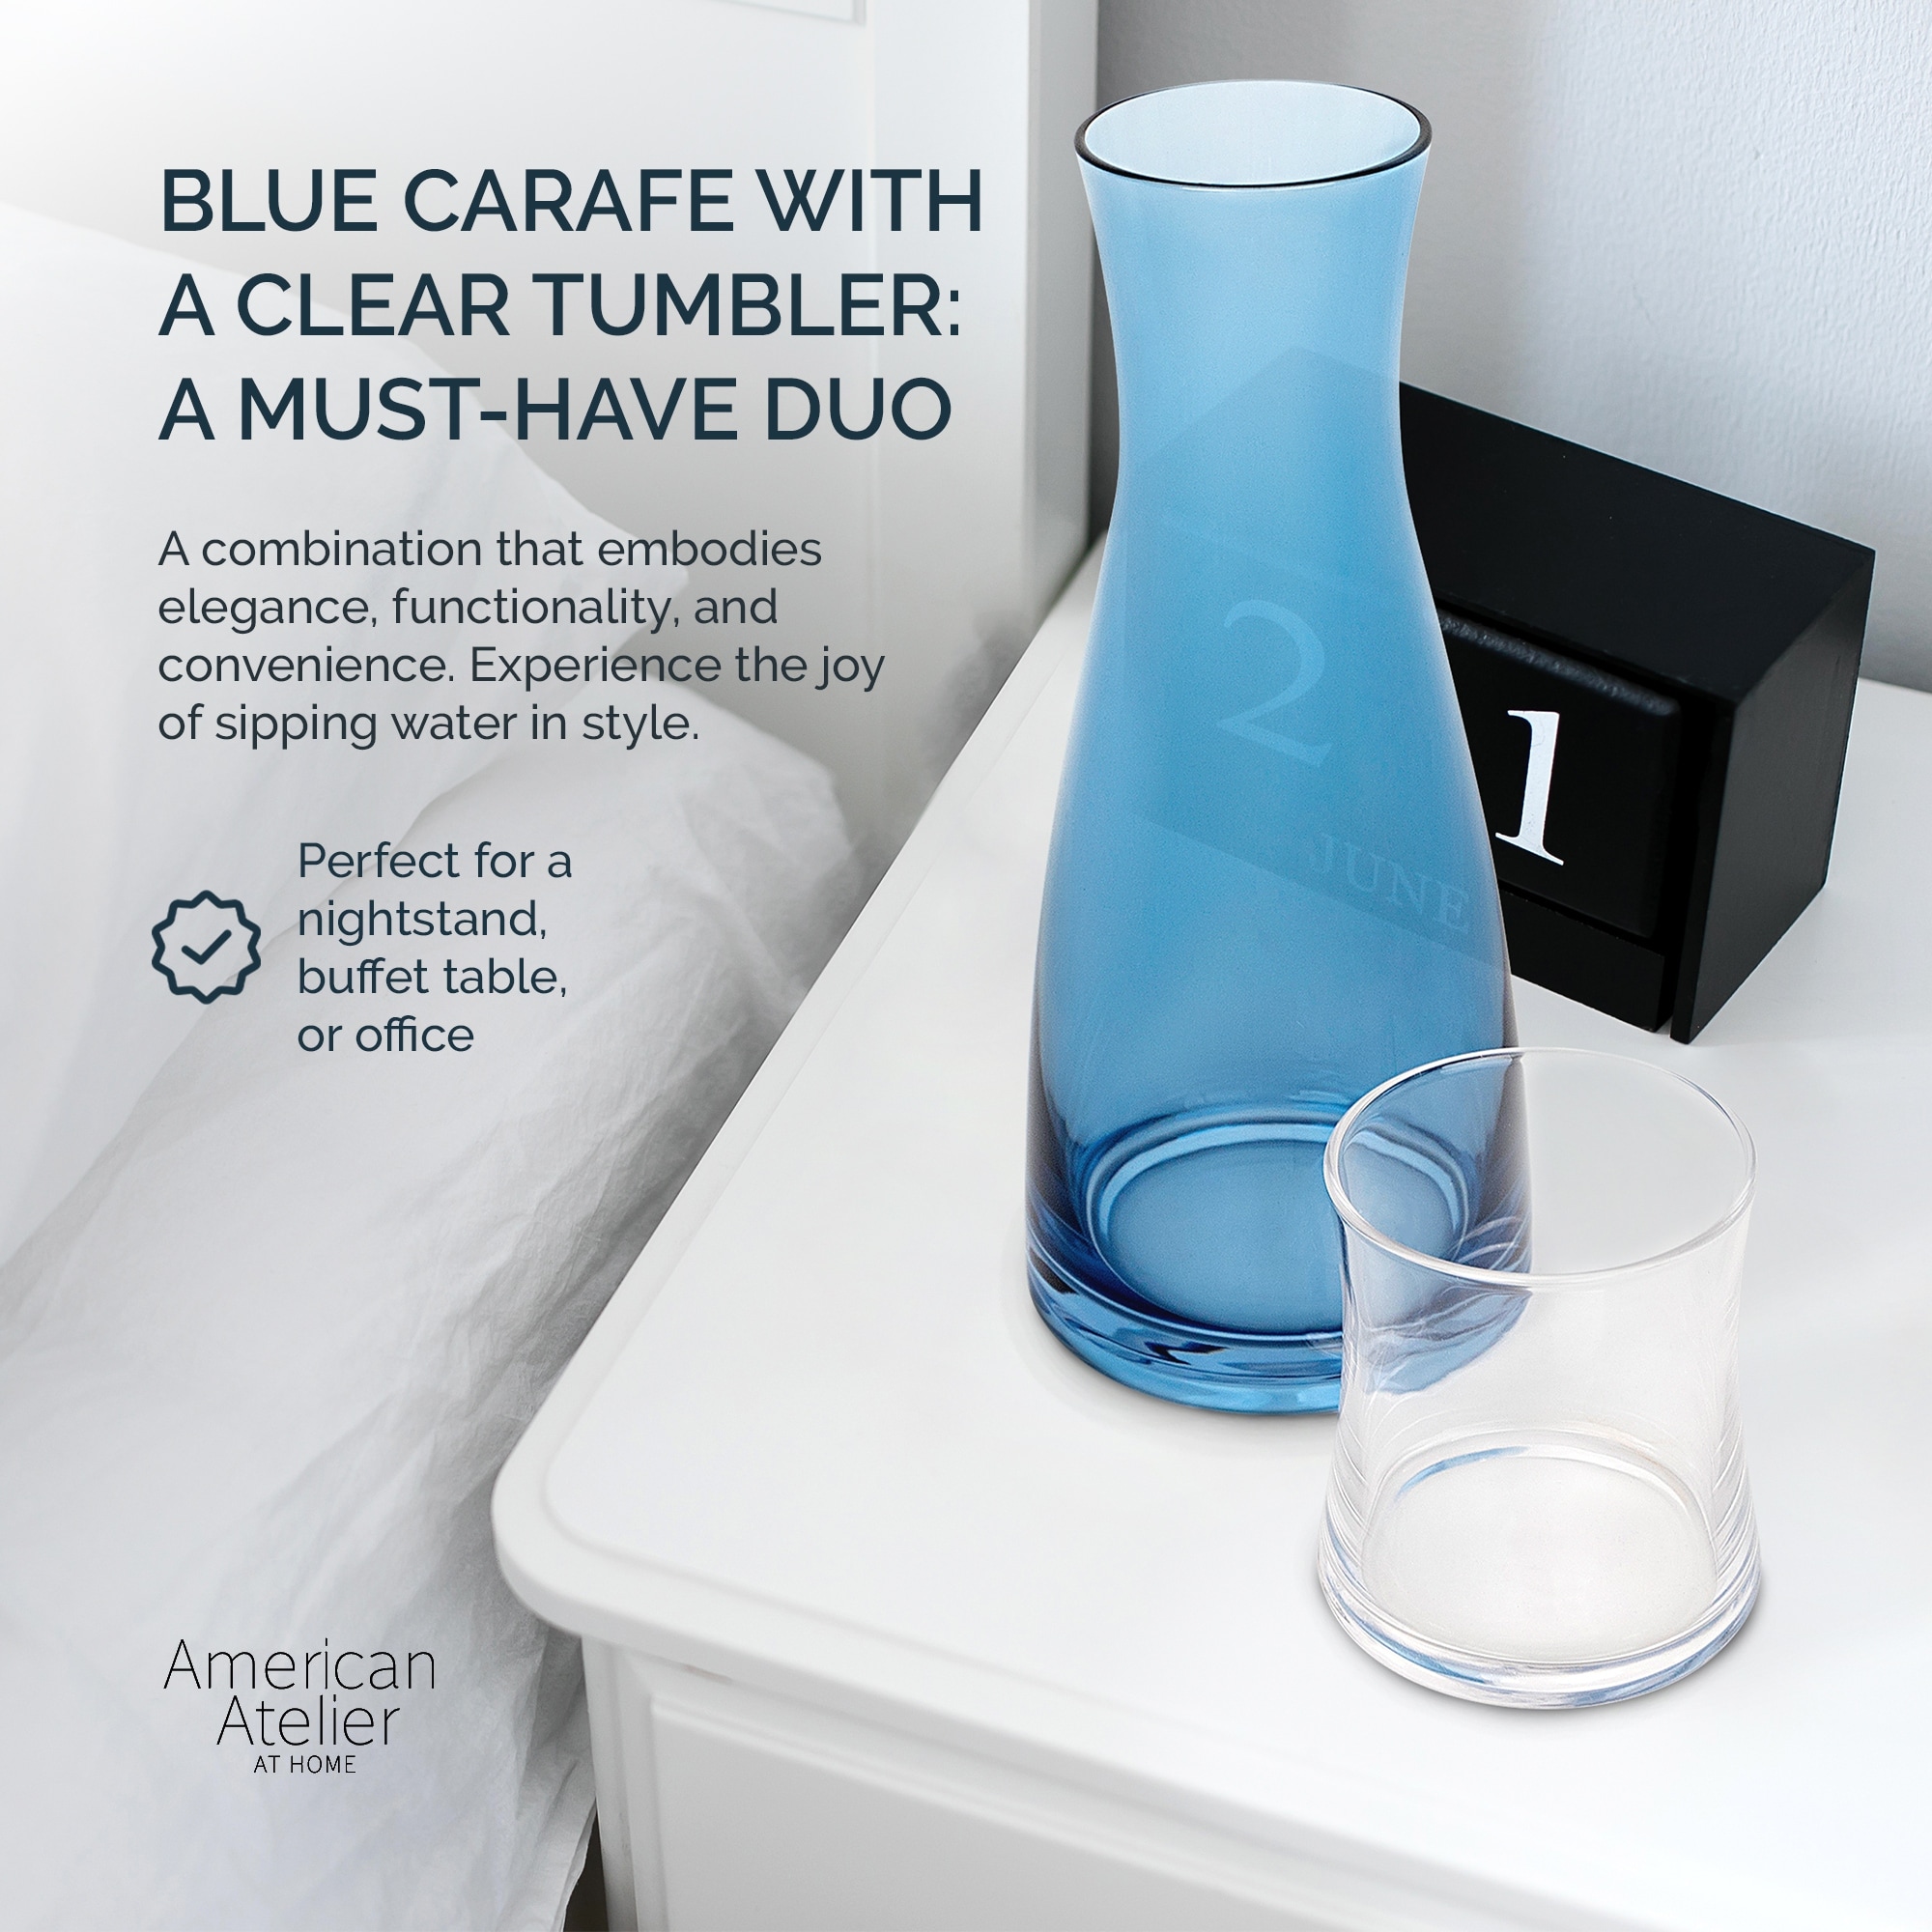 https://ak1.ostkcdn.com/images/products/is/images/direct/6fe3a245e0b89796a6254a207933e52c7a9ef2af/American-Atelier-Bedside-Blue-Water-Carafe-with-Clear-Tumbler.jpg